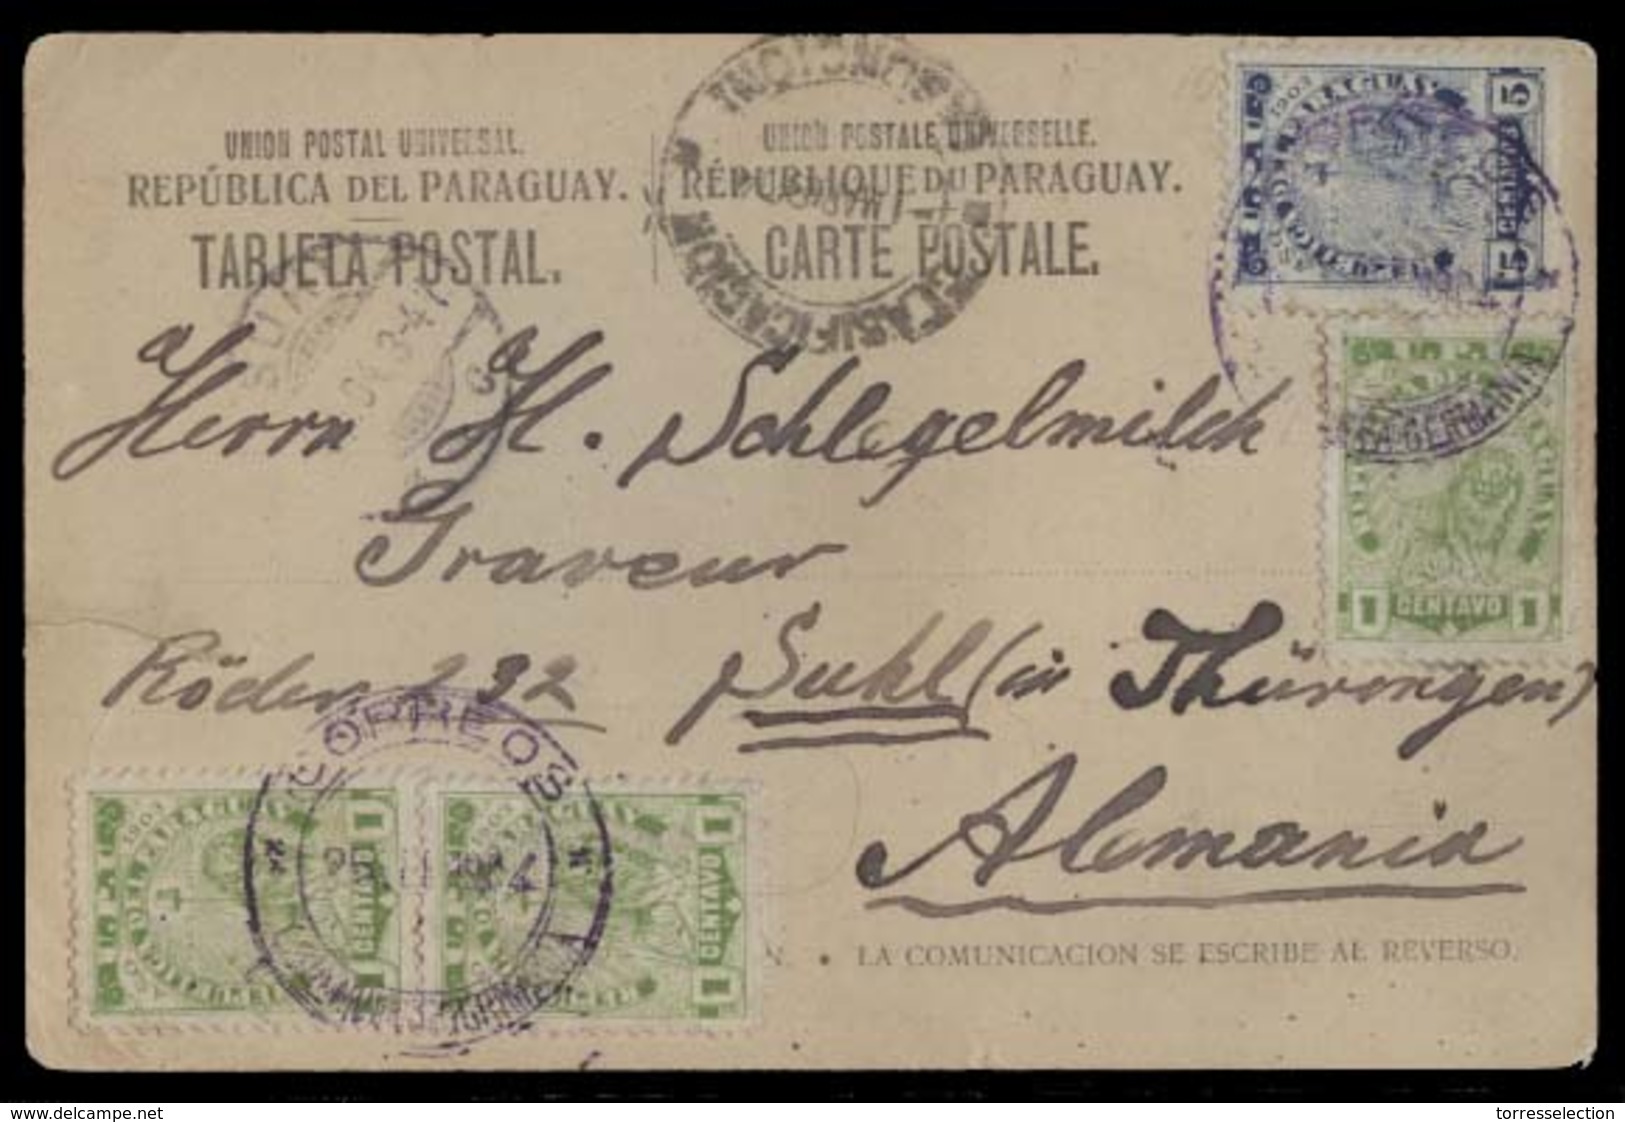 PARAGUAY. 1904. Colonia Nueva Germania - Germany. Local View Postcard India Caingua Fkd 8c Rate. Violet Cachet. VF Card. - Paraguay